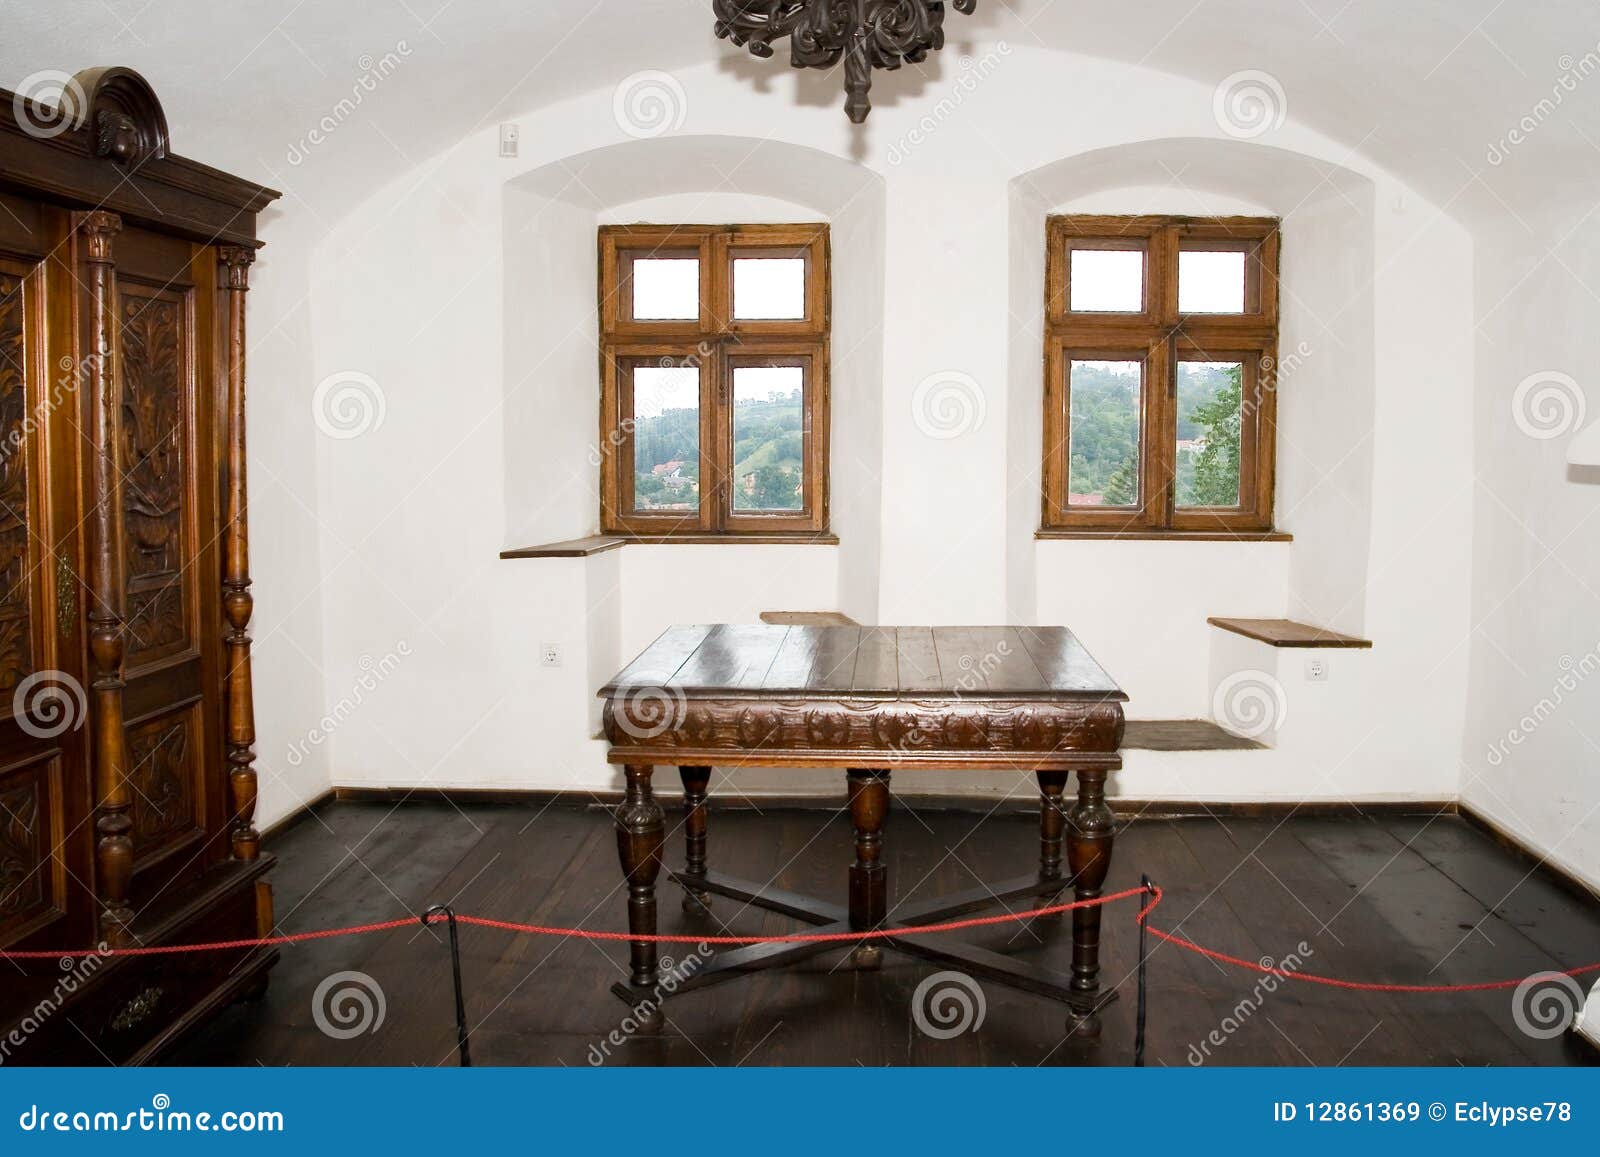 Interior of bran castle stock image. Image of historical 12861369